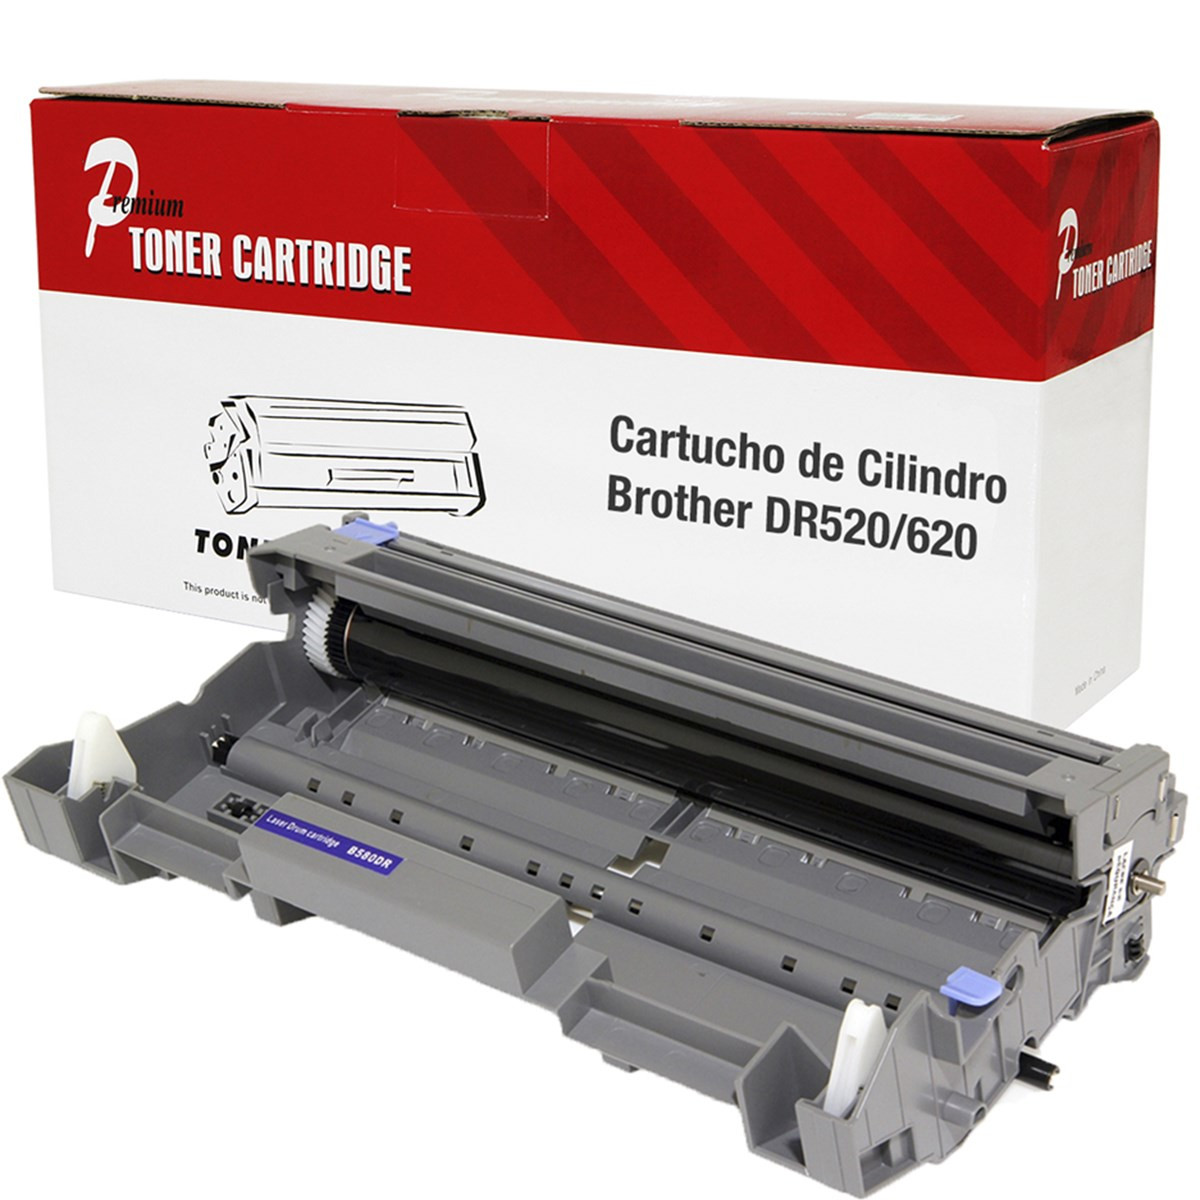 CART.DE CILINDRO BROTHER IKON SUPRY DR-520620